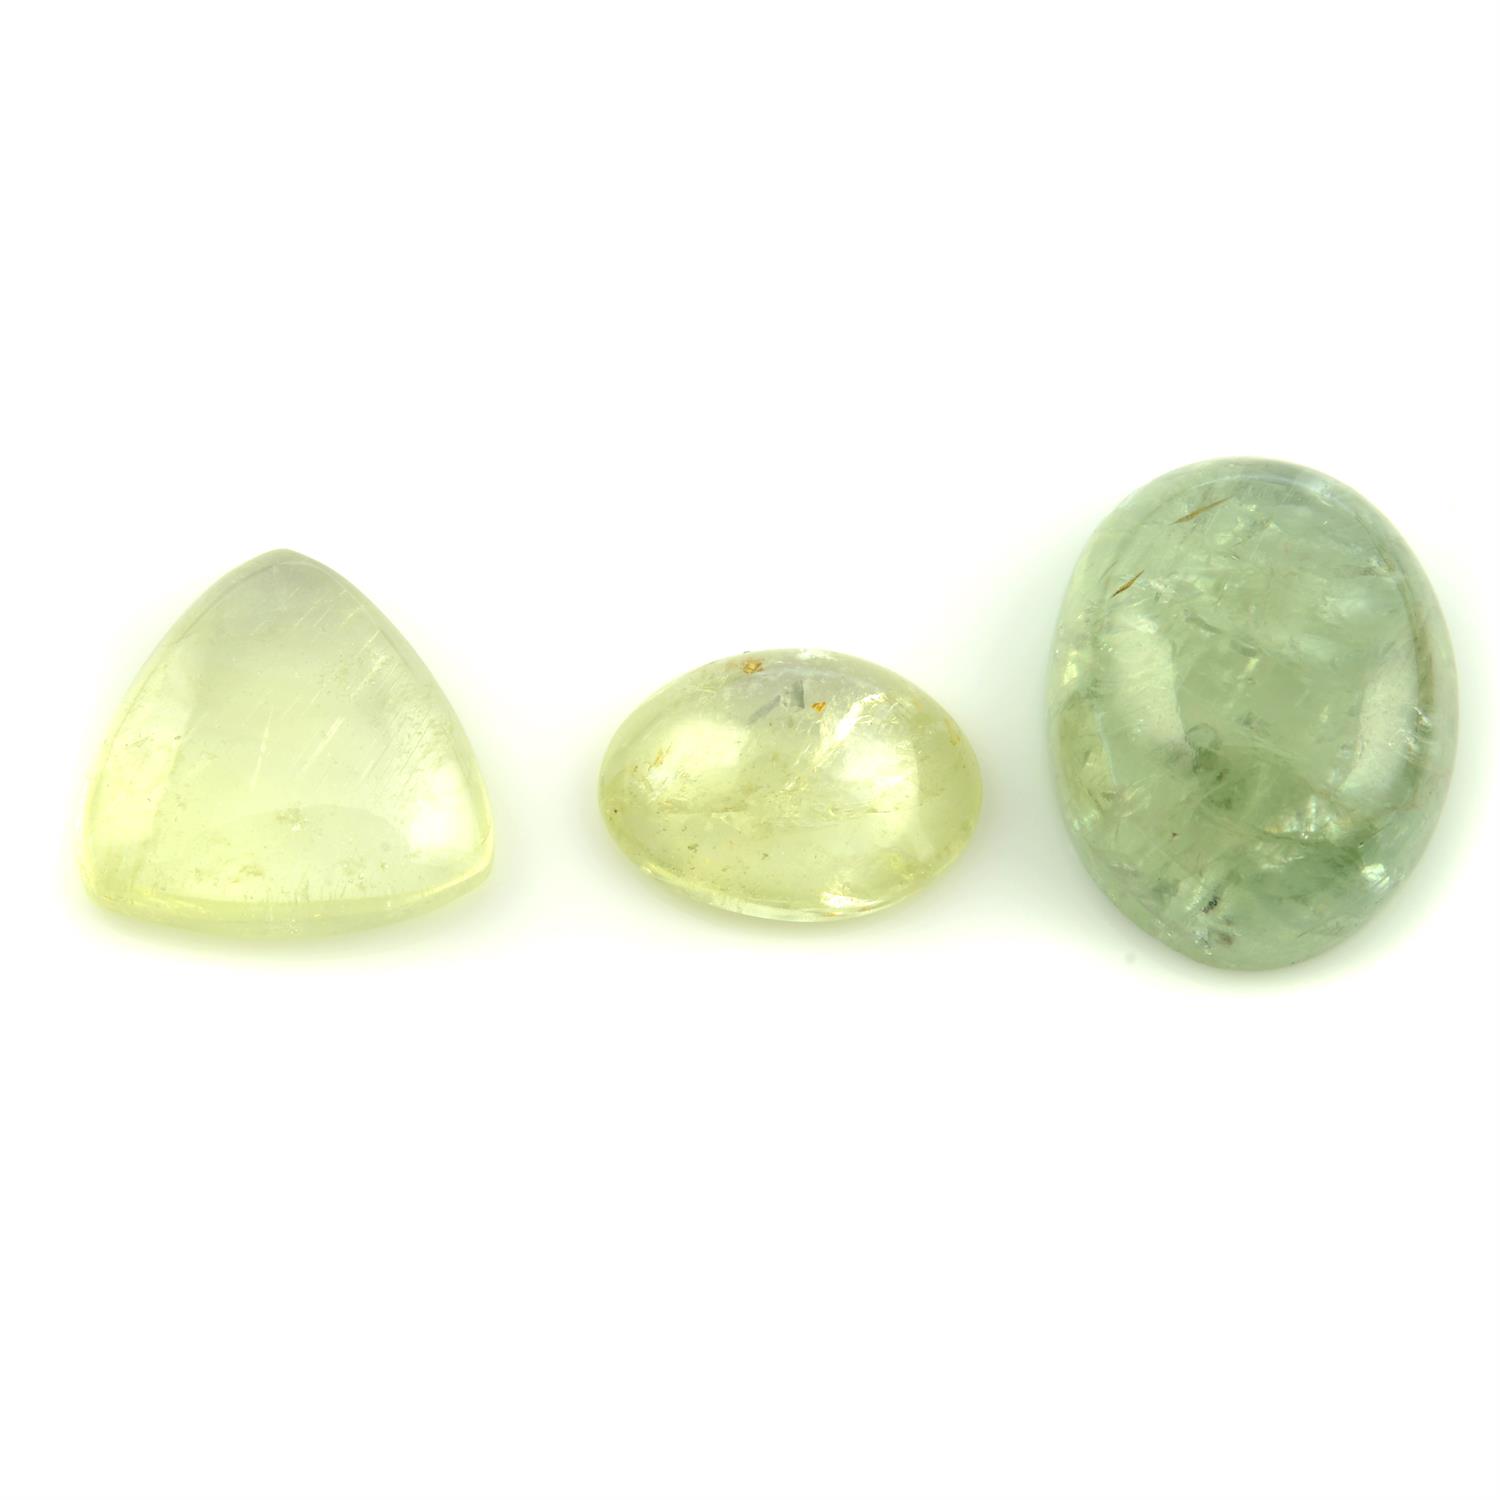 Three oval shape sapphire cabochons, weighing 16.33ct